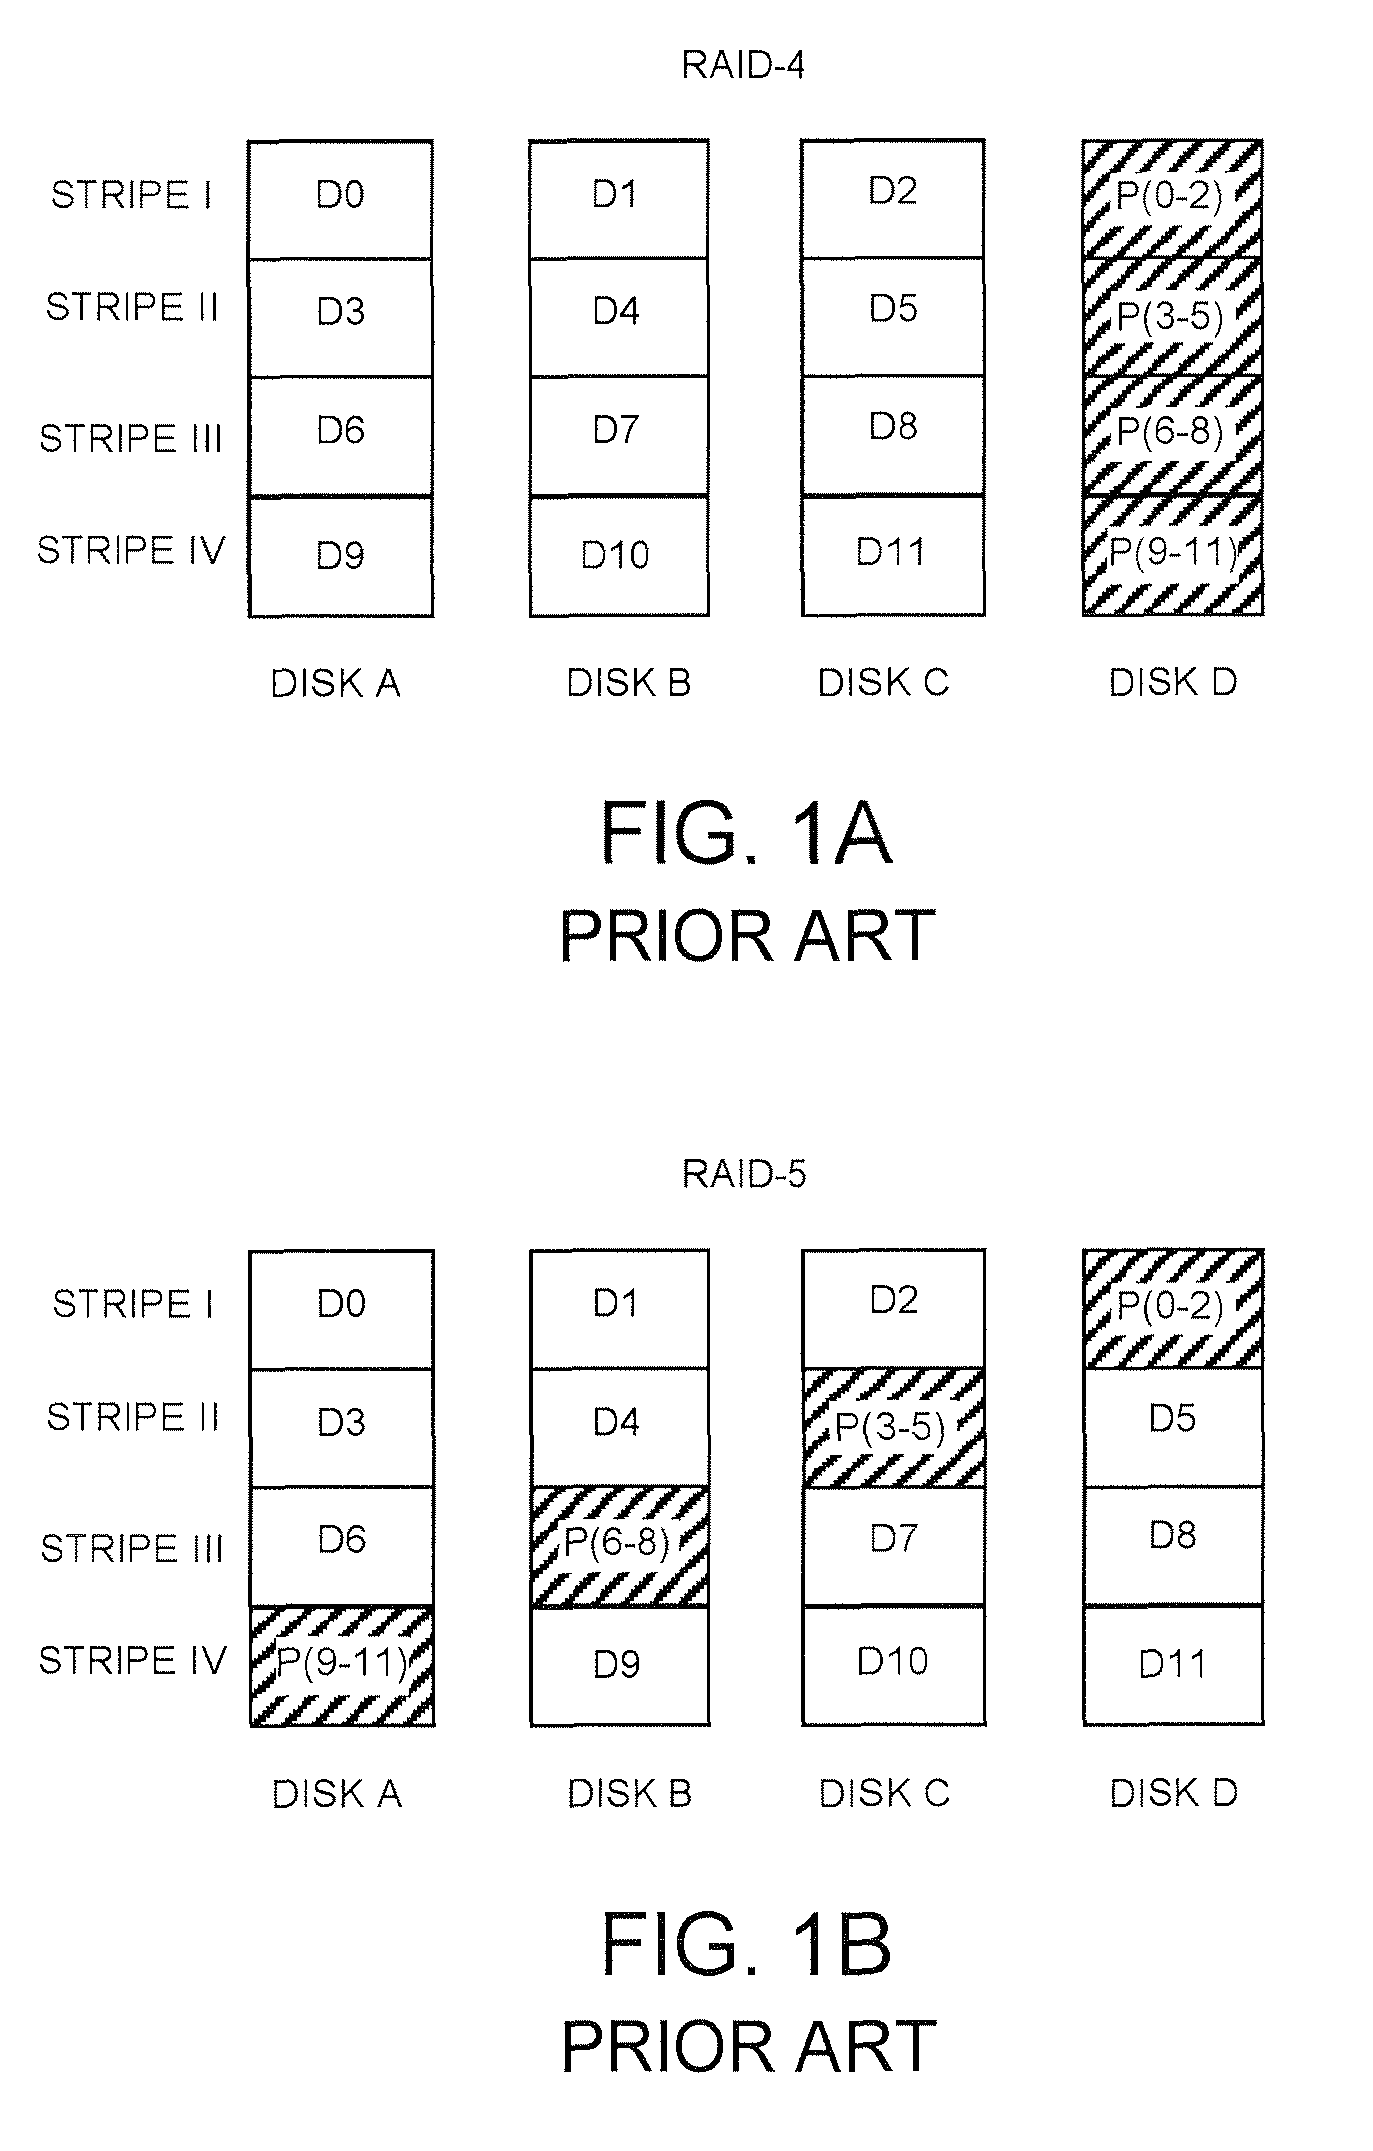 System and method for eliminating zeroing of disk drives in RAID arrays